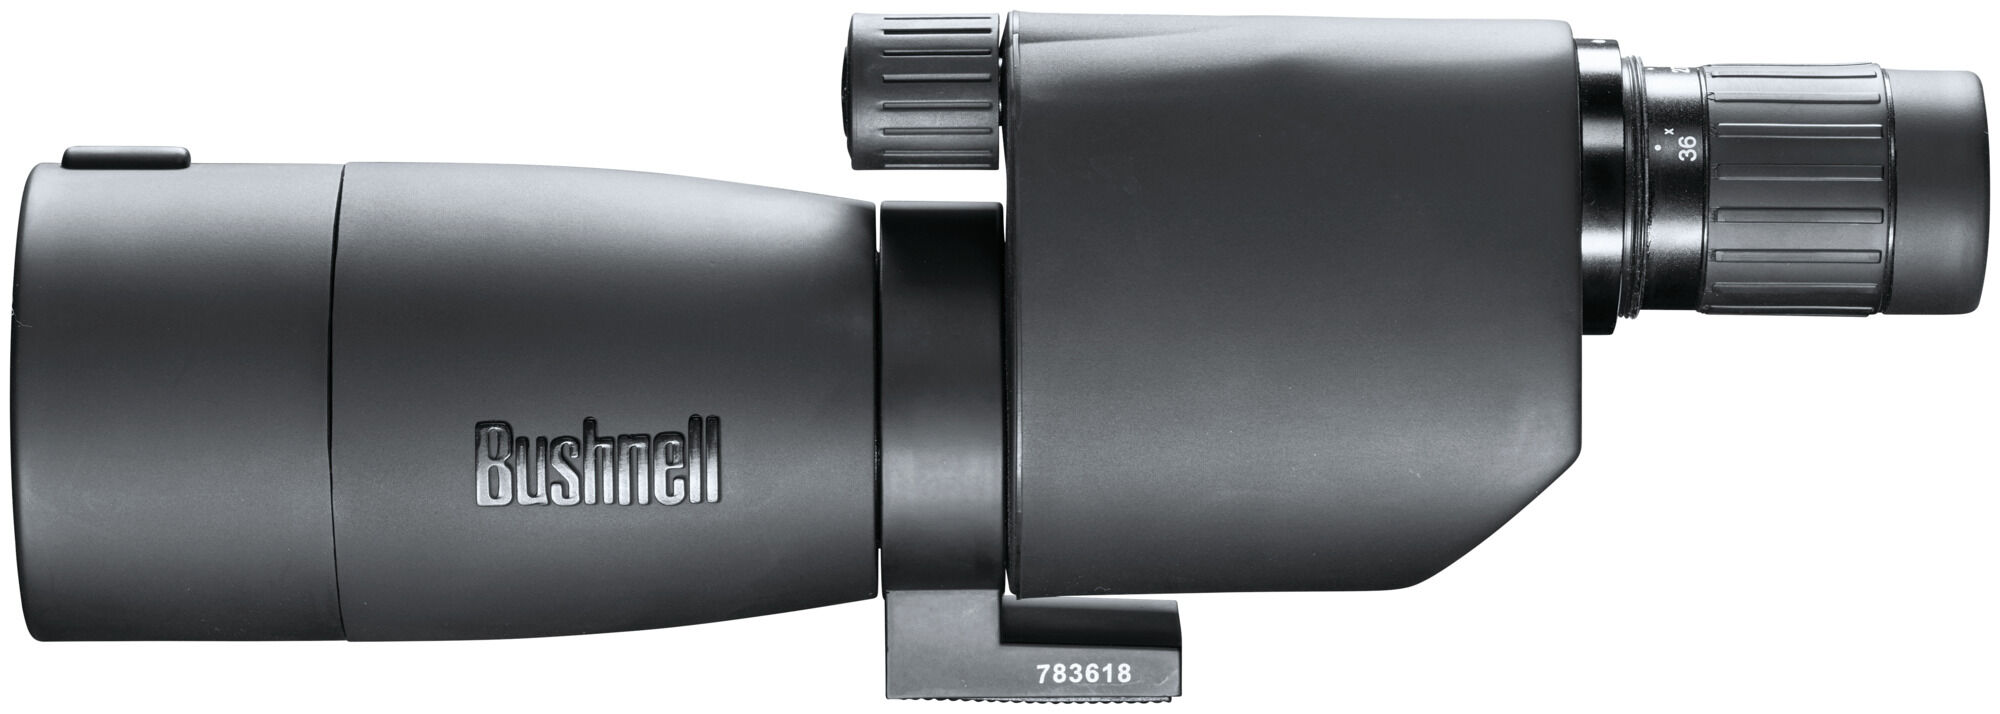 Buy Sentry® Spotting Scope 18-36x50 and More | Bushnell